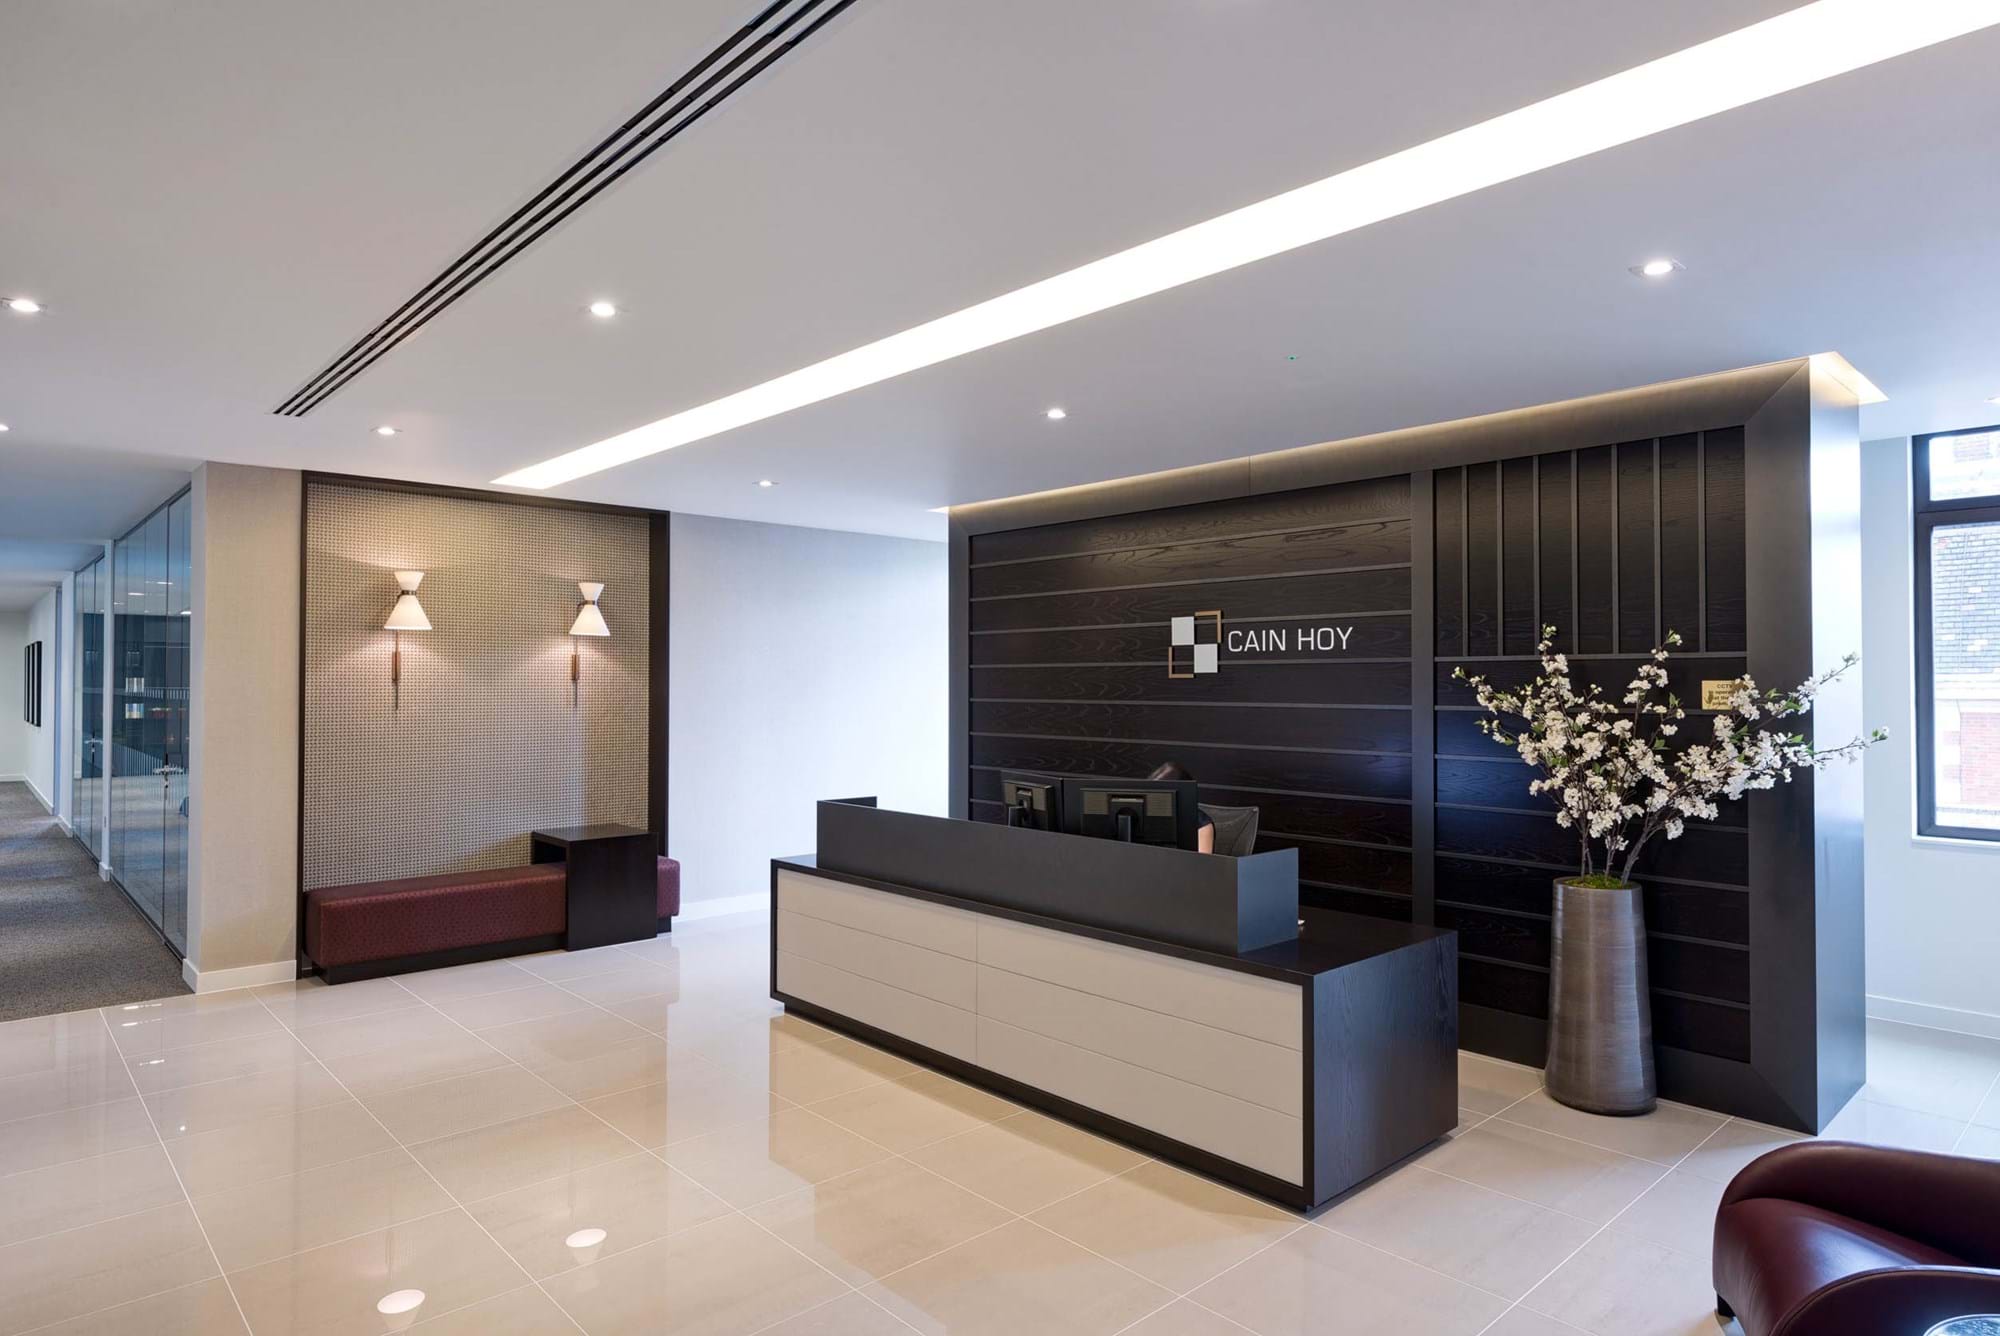 Modus Workspace office design, fit out and refurbishment - Cain Hoy - Reception - Cain Hoy 01 web site.jpg